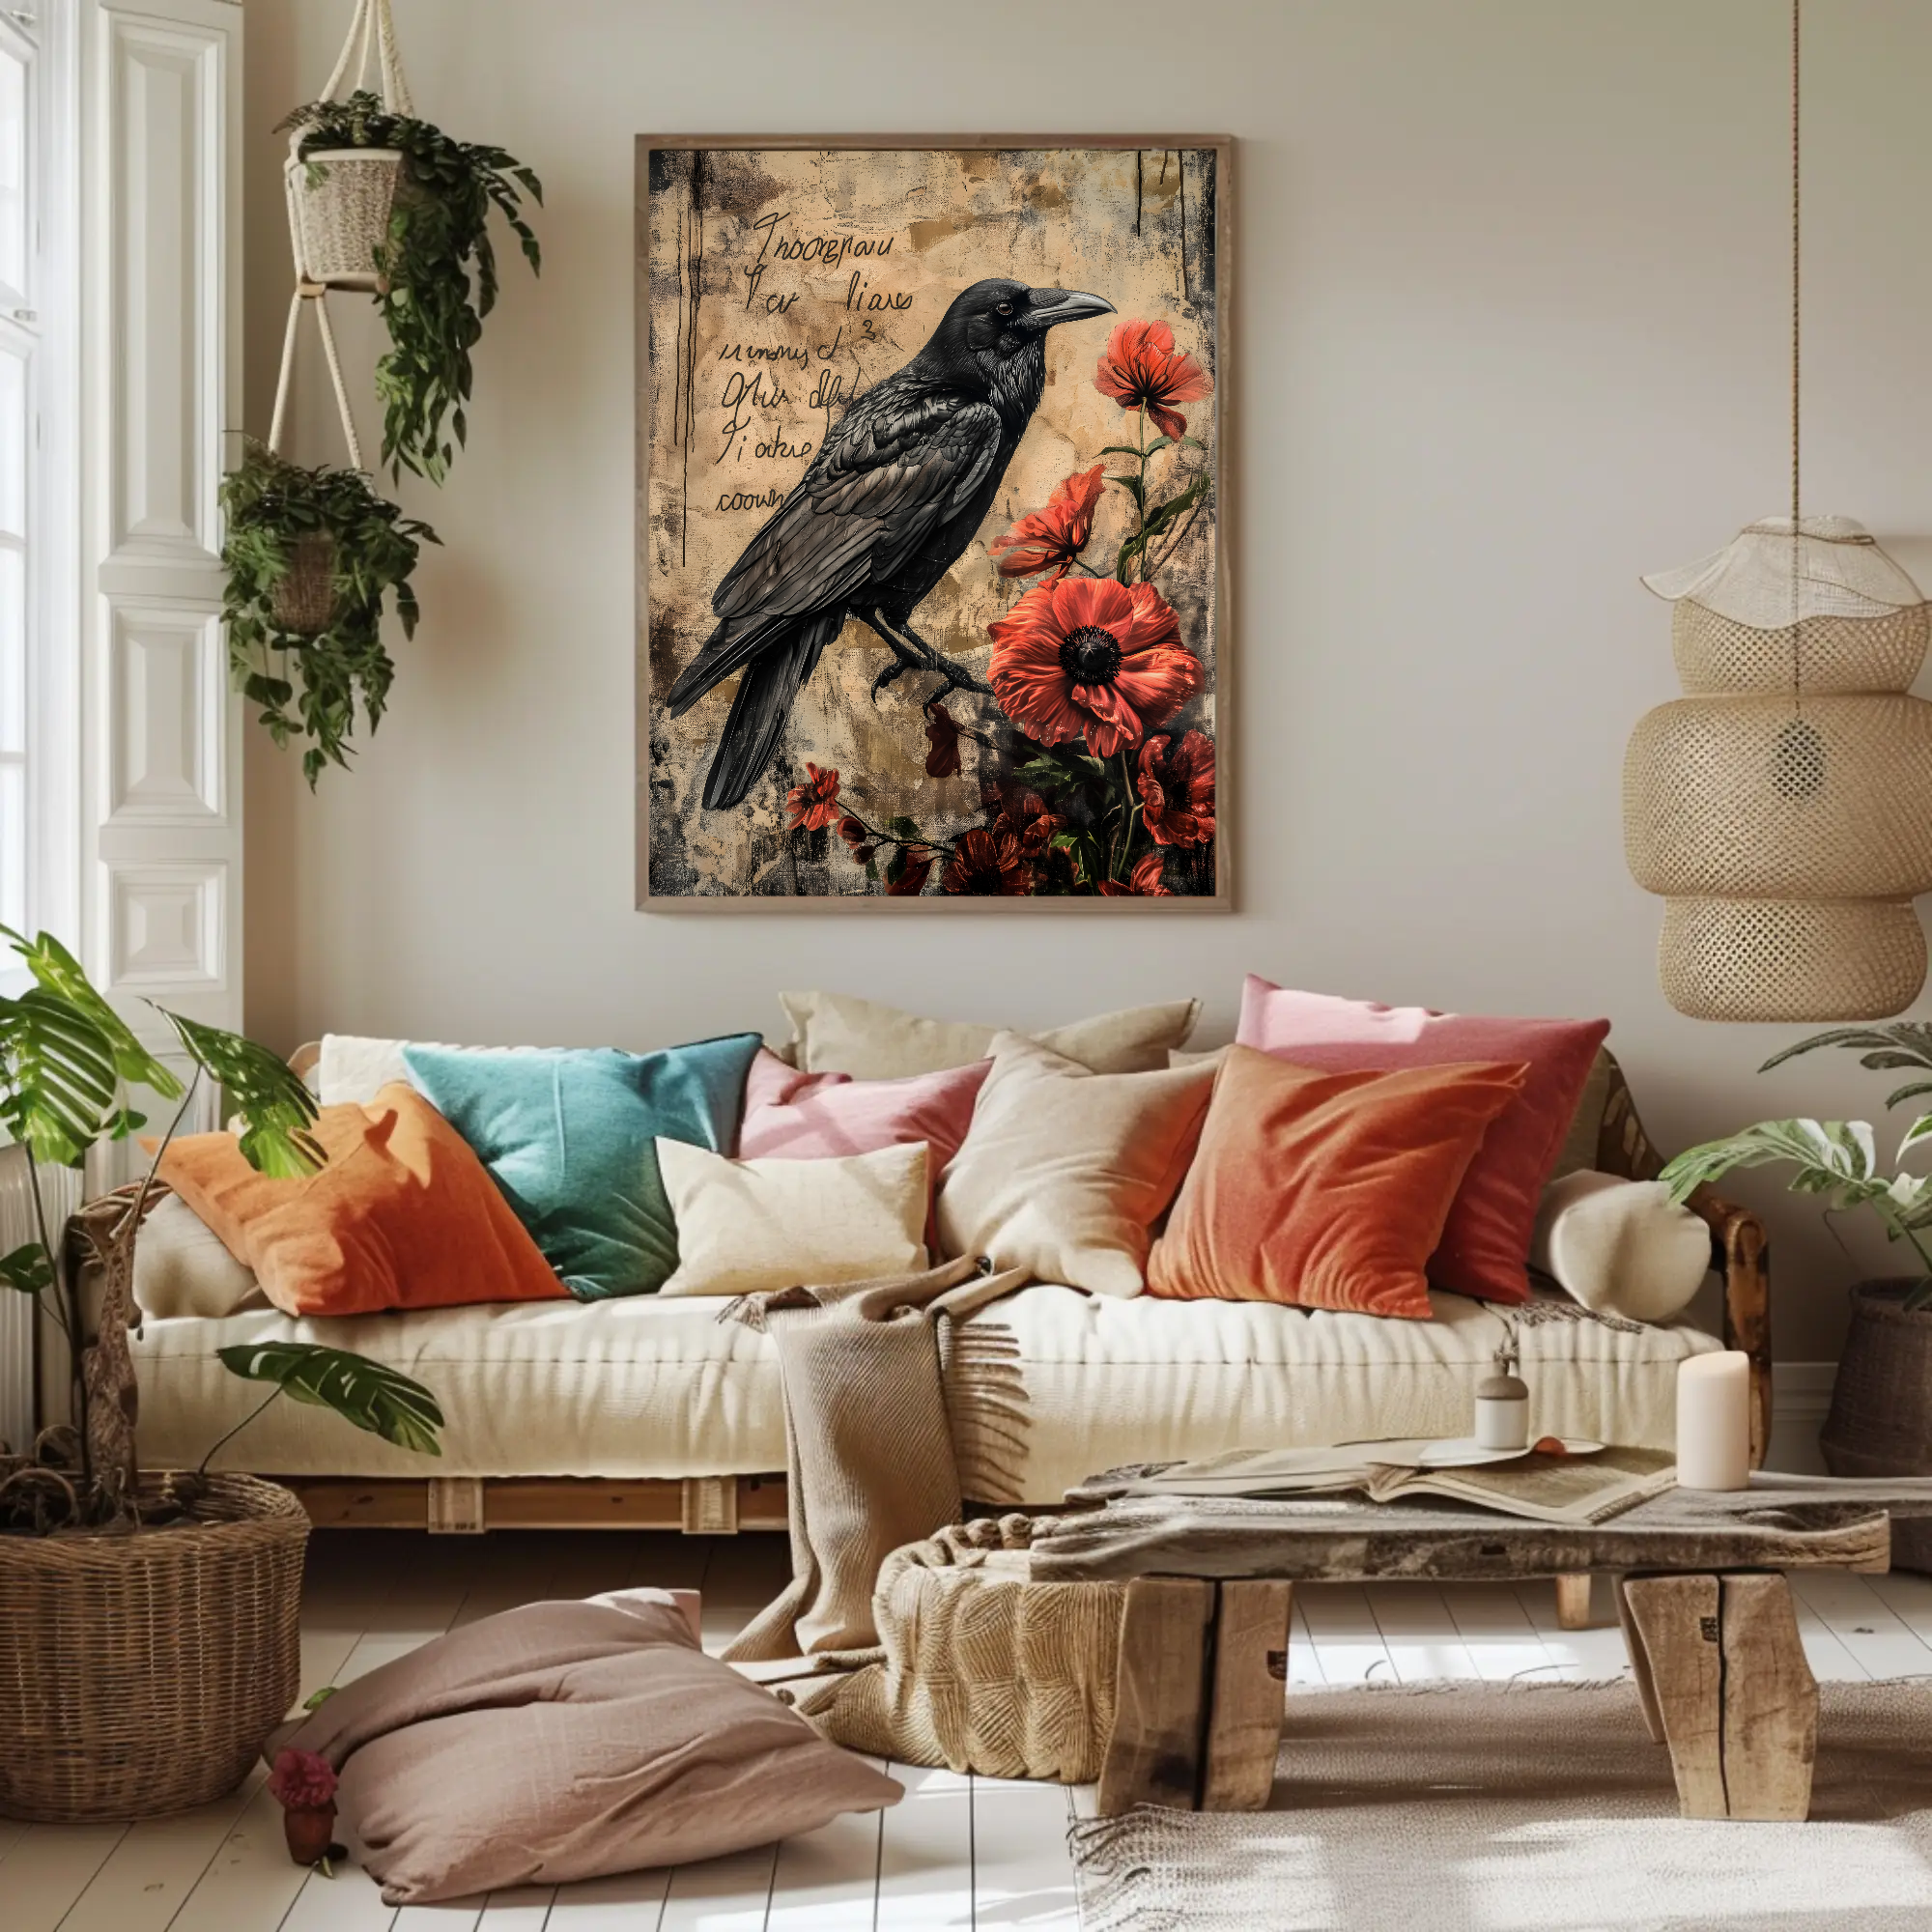 A Poetic Raven Art Piece: Gothic Wall Art